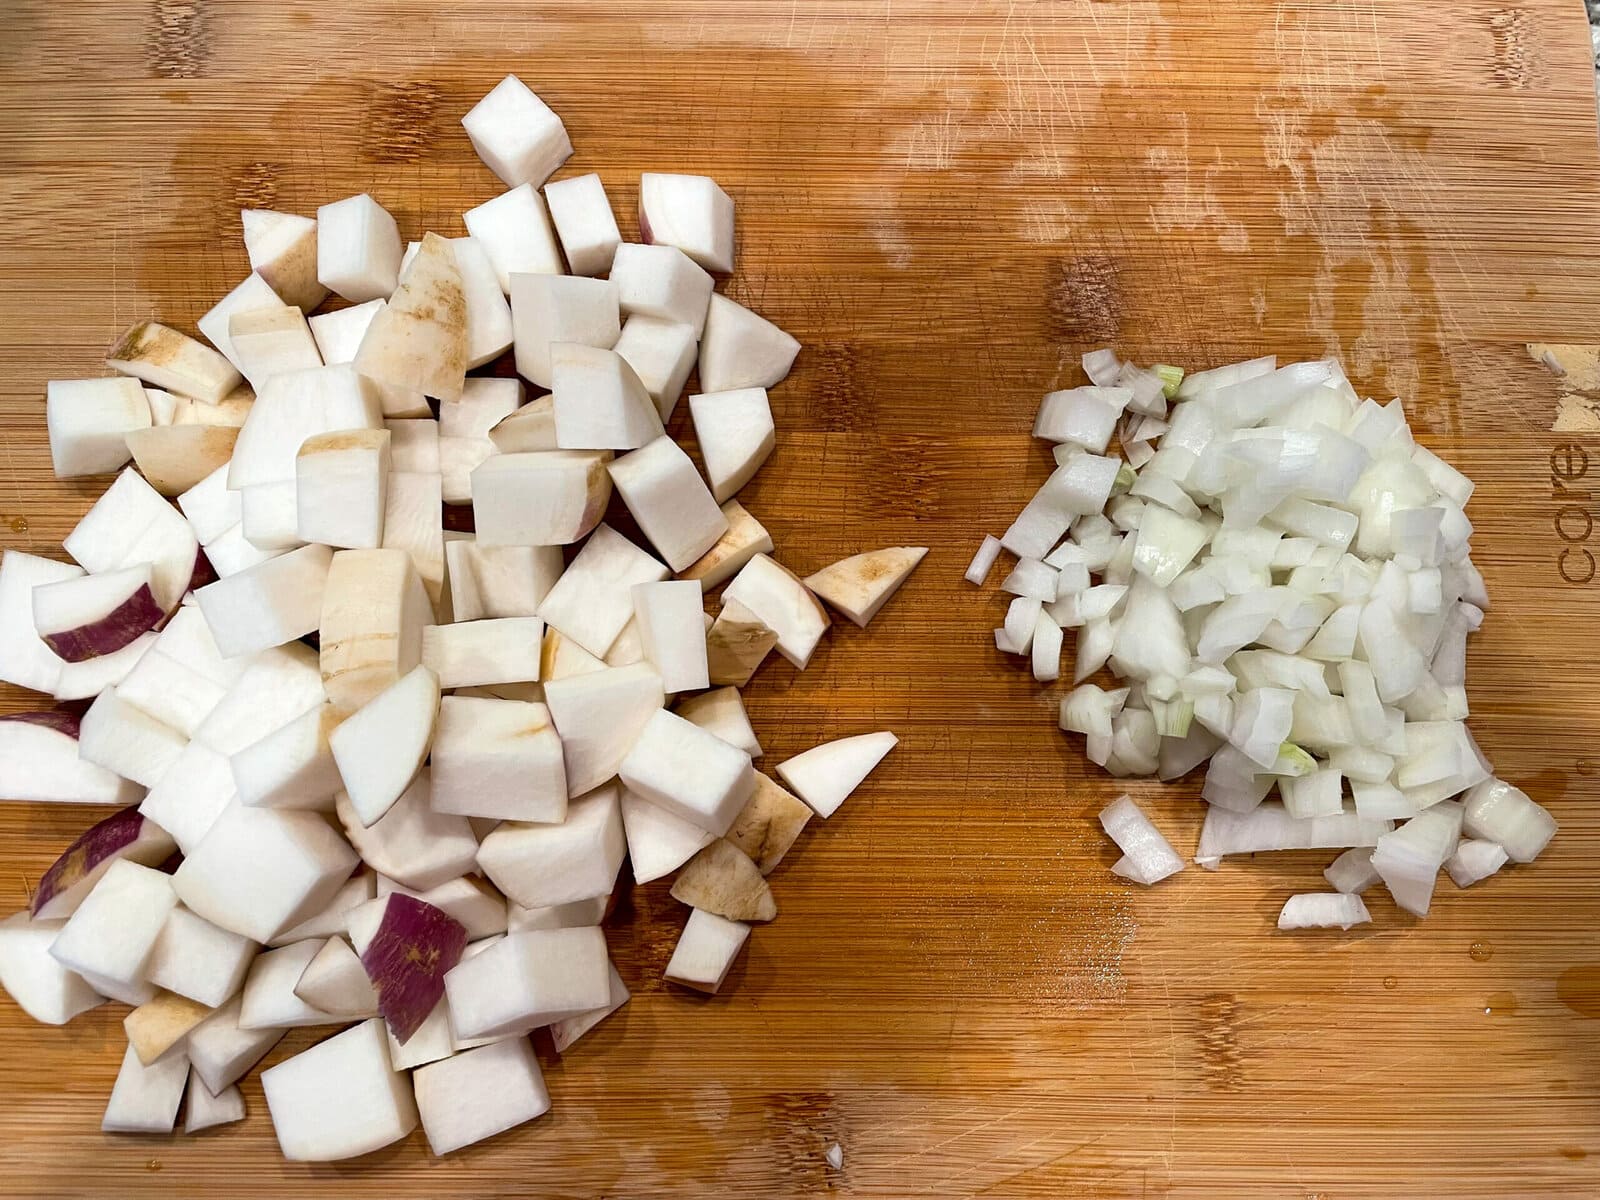 chopped turnip root and onion on cutting board.